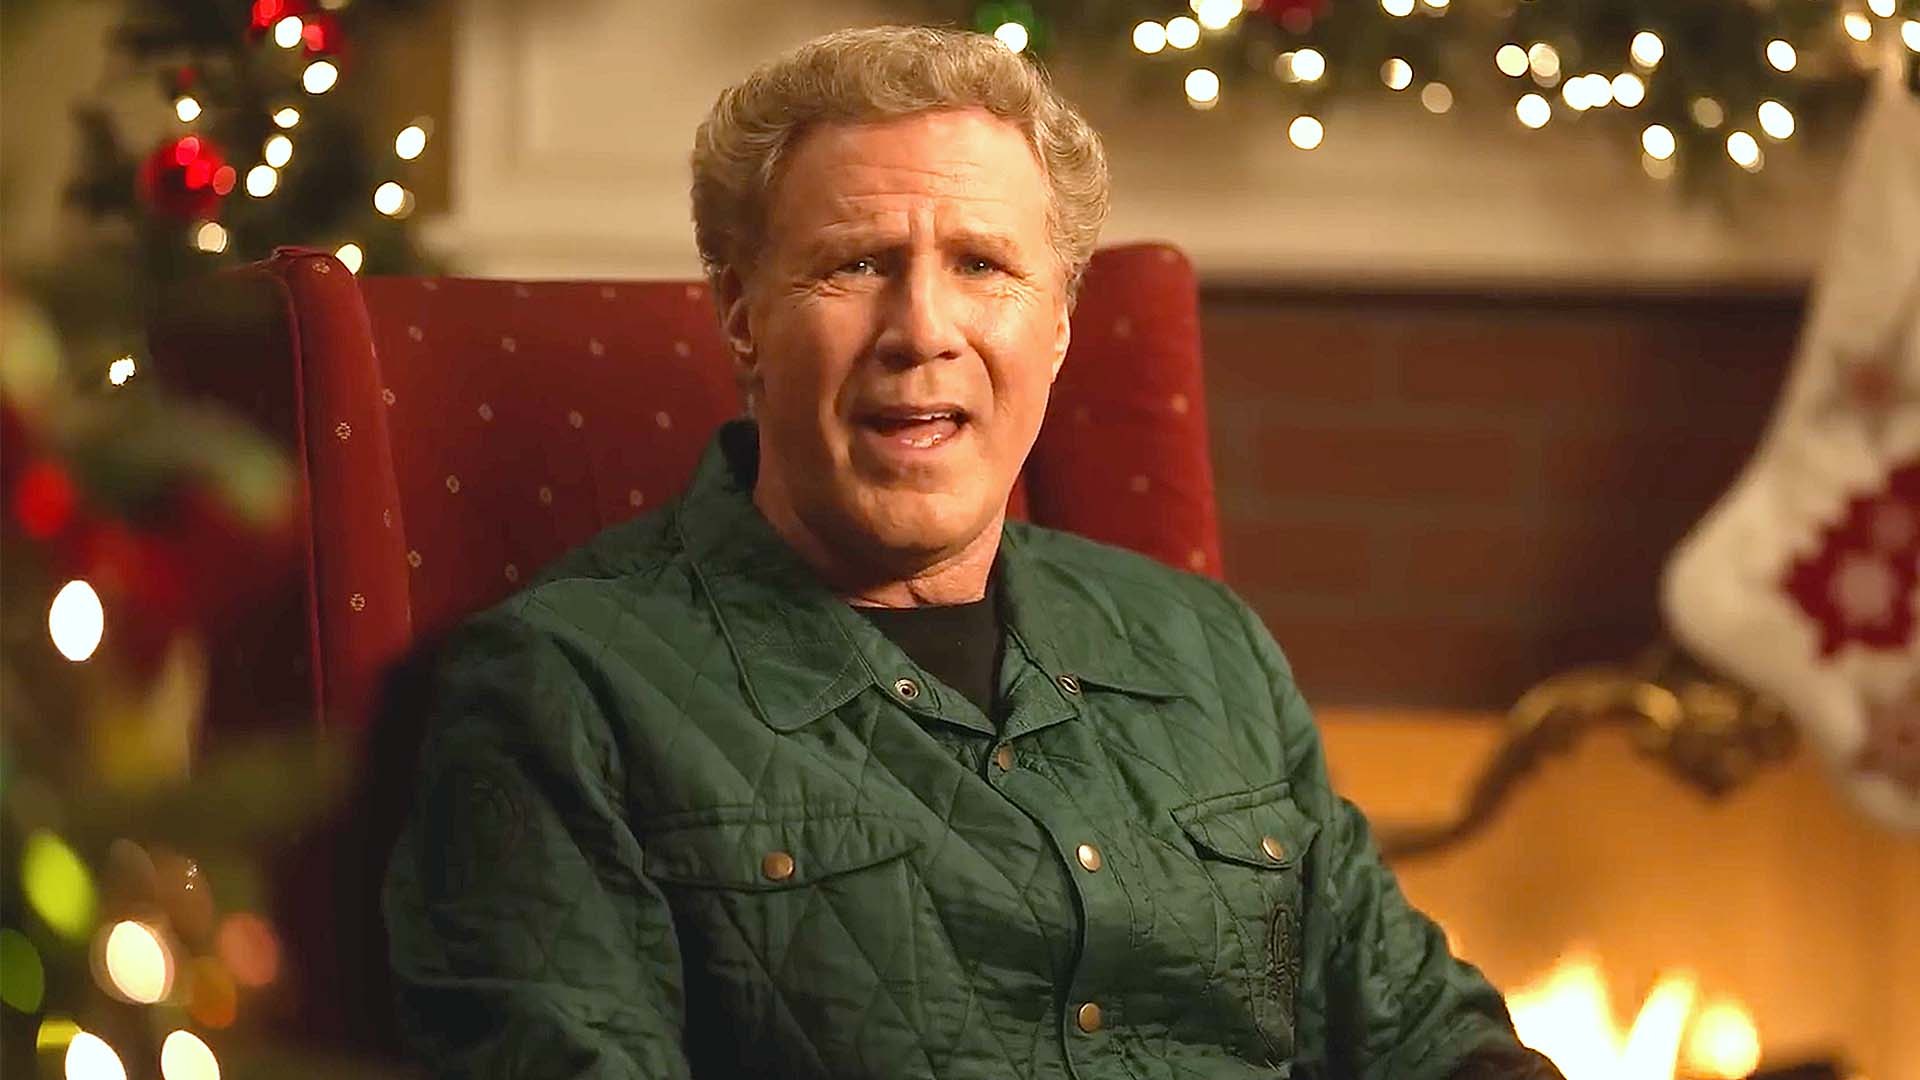 How Will Ferrell's new Christmas movie Spirited calls out Elf